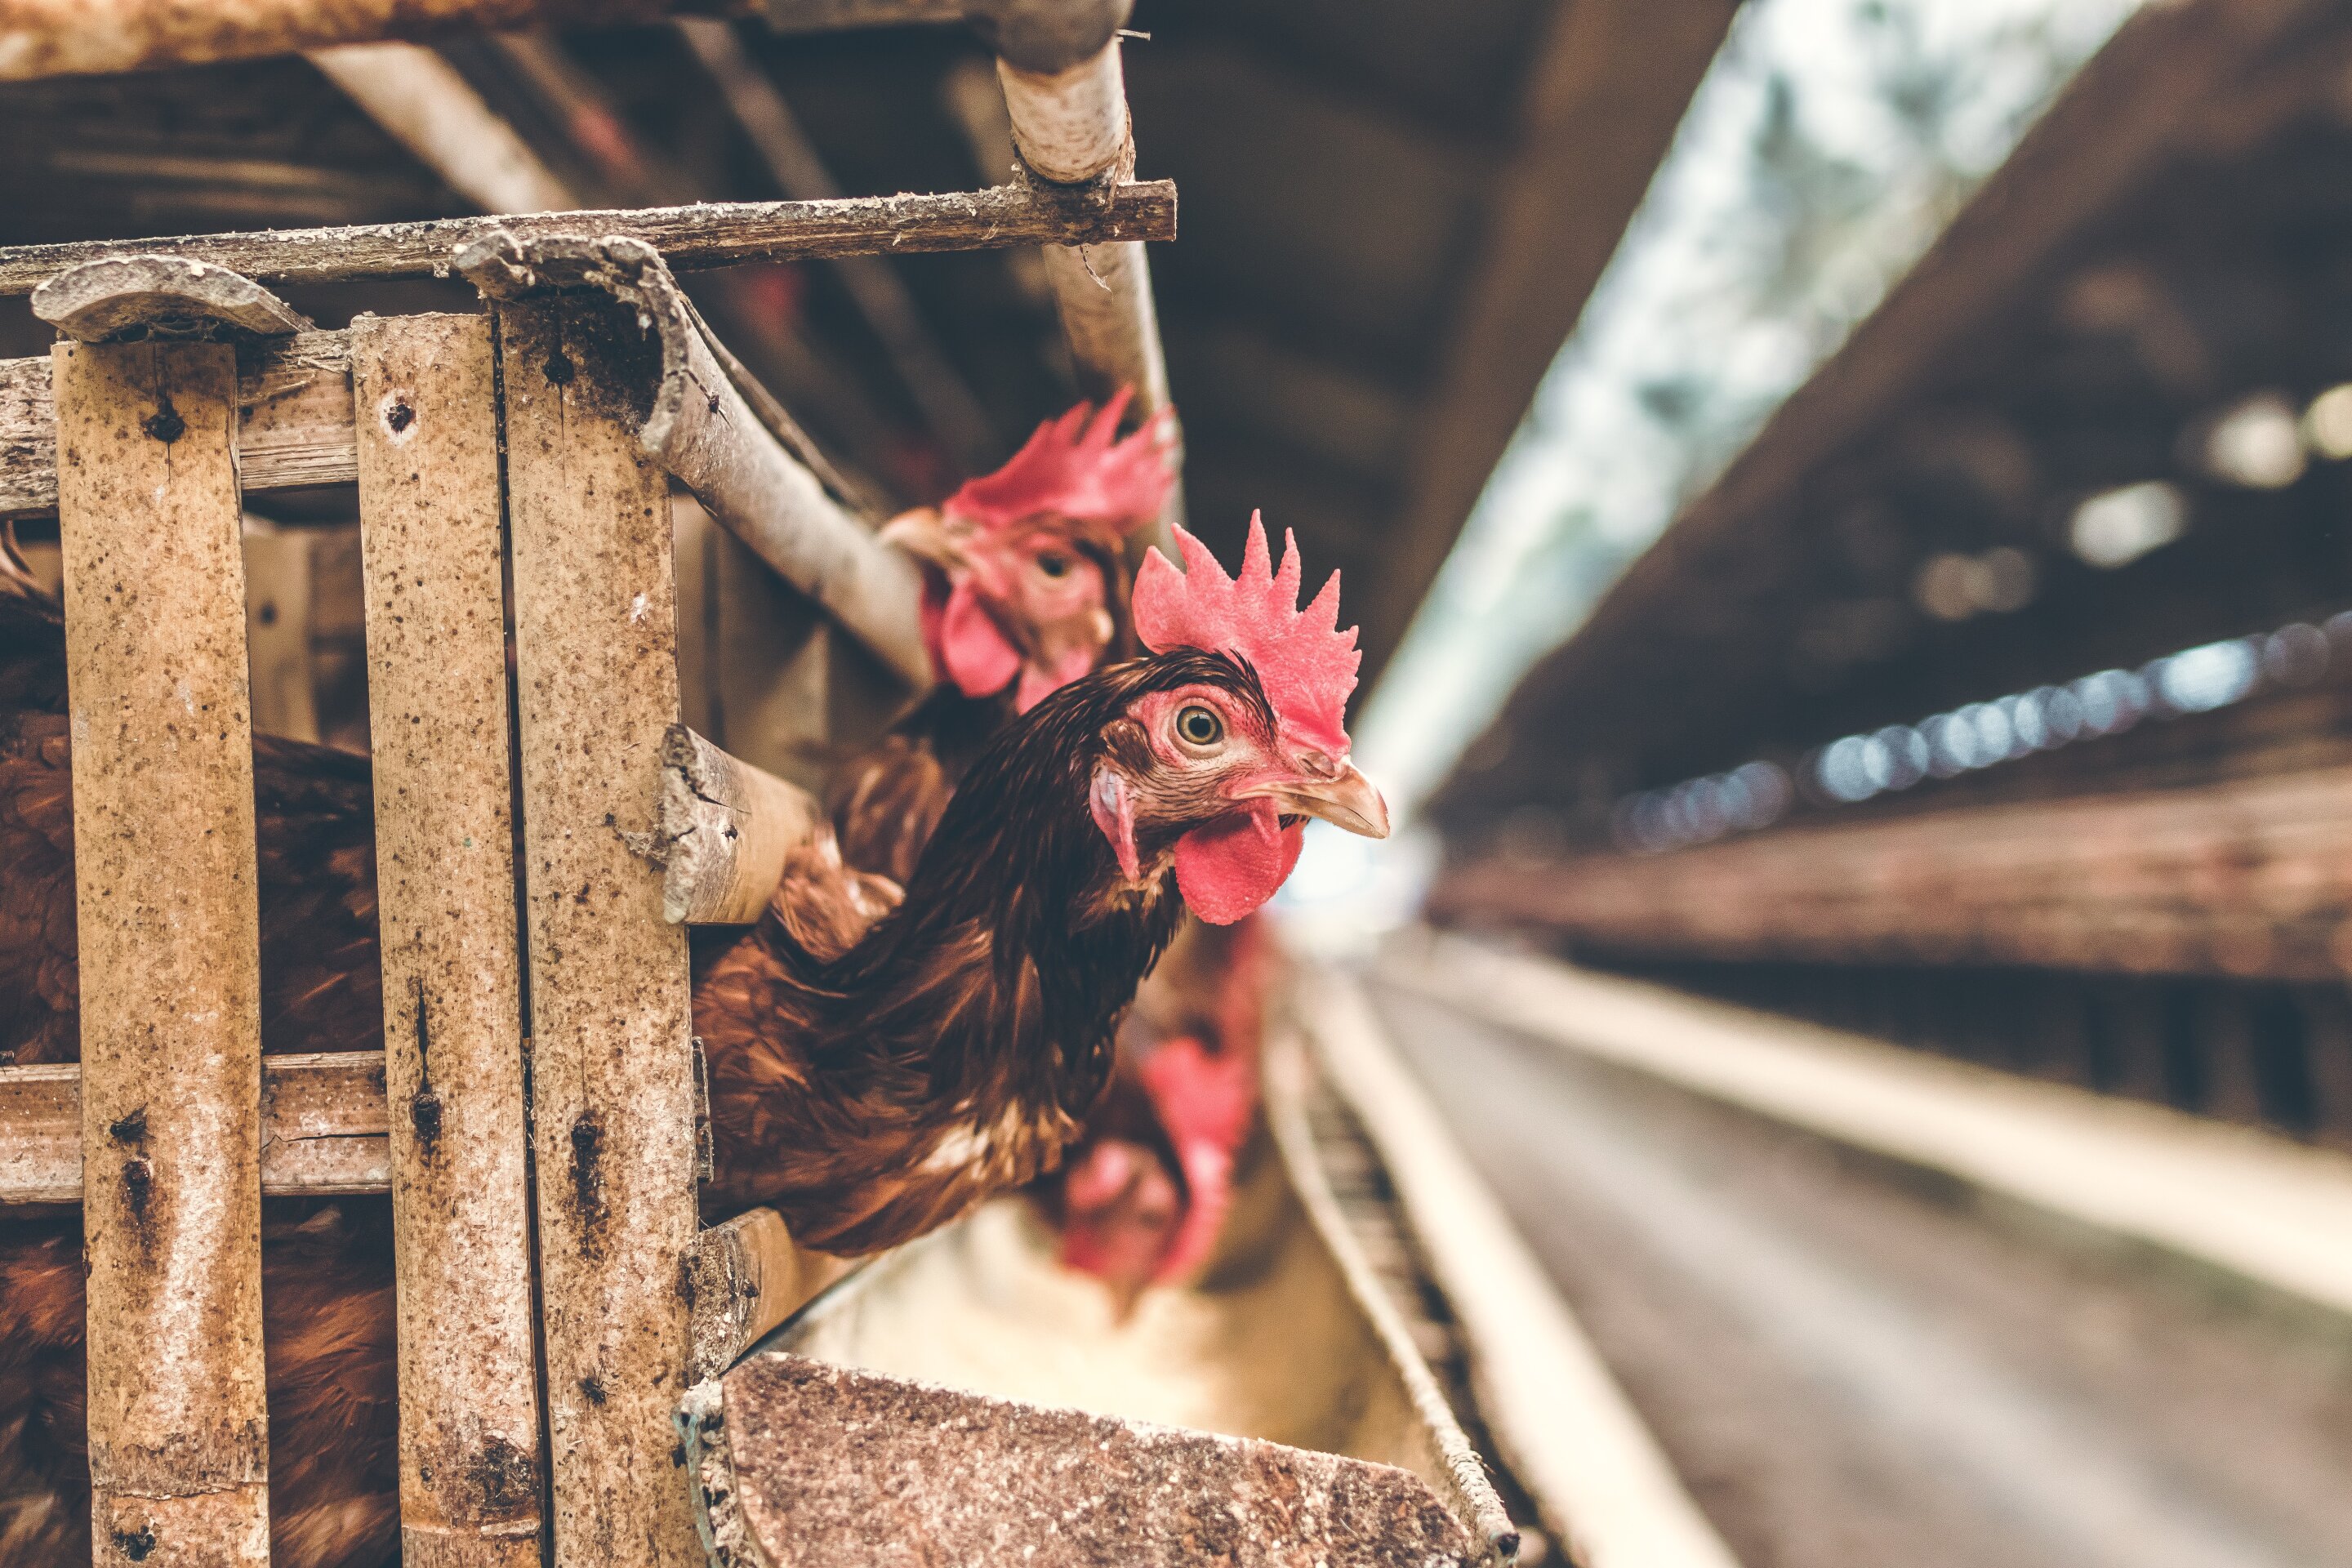 Scientists use machine learning to help fight antibiotic resistance in farmed chickens